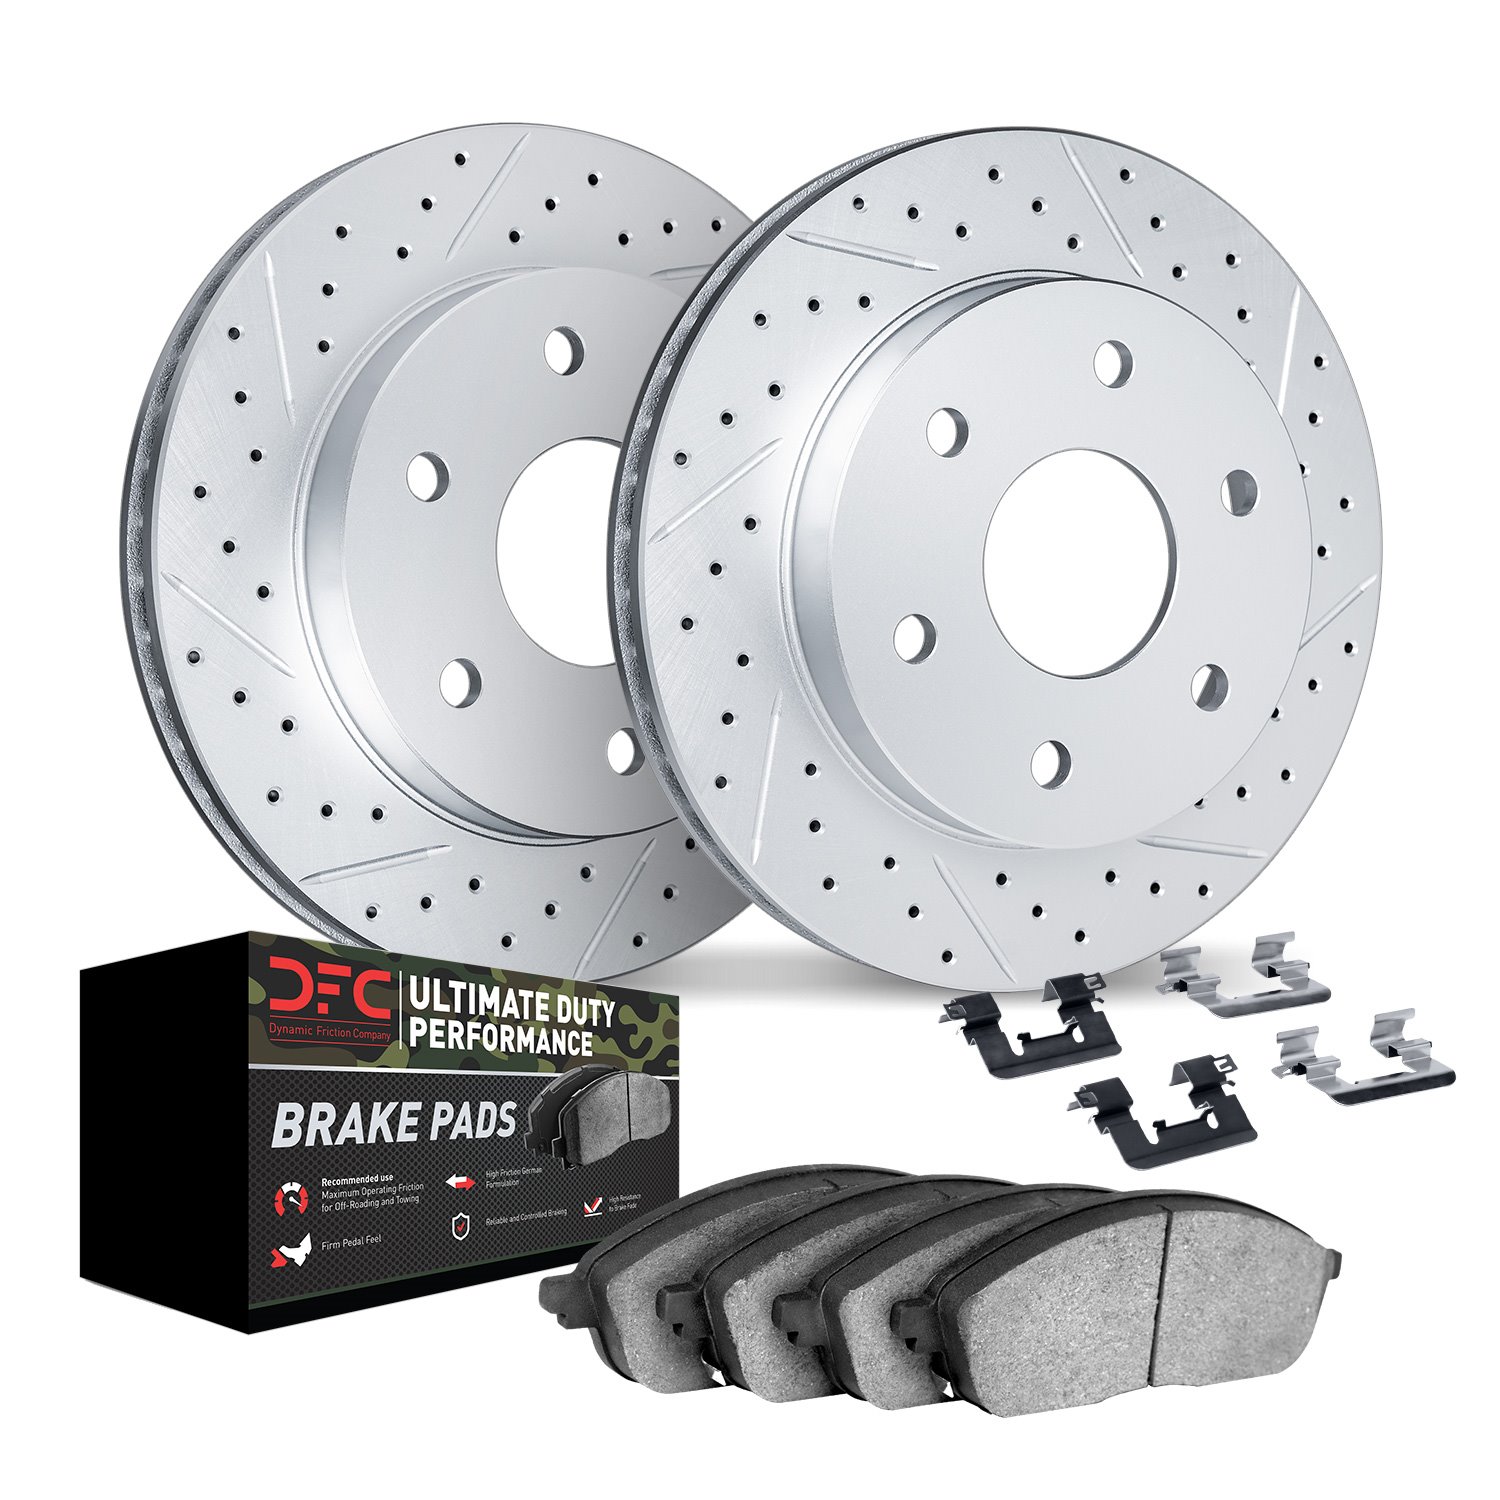 2412-67008 Geoperformance Drilled/Slotted Brake Rotors with Ultimate-Duty Brake Pads Kit & Hardware, Fits Select Infiniti/Nissan